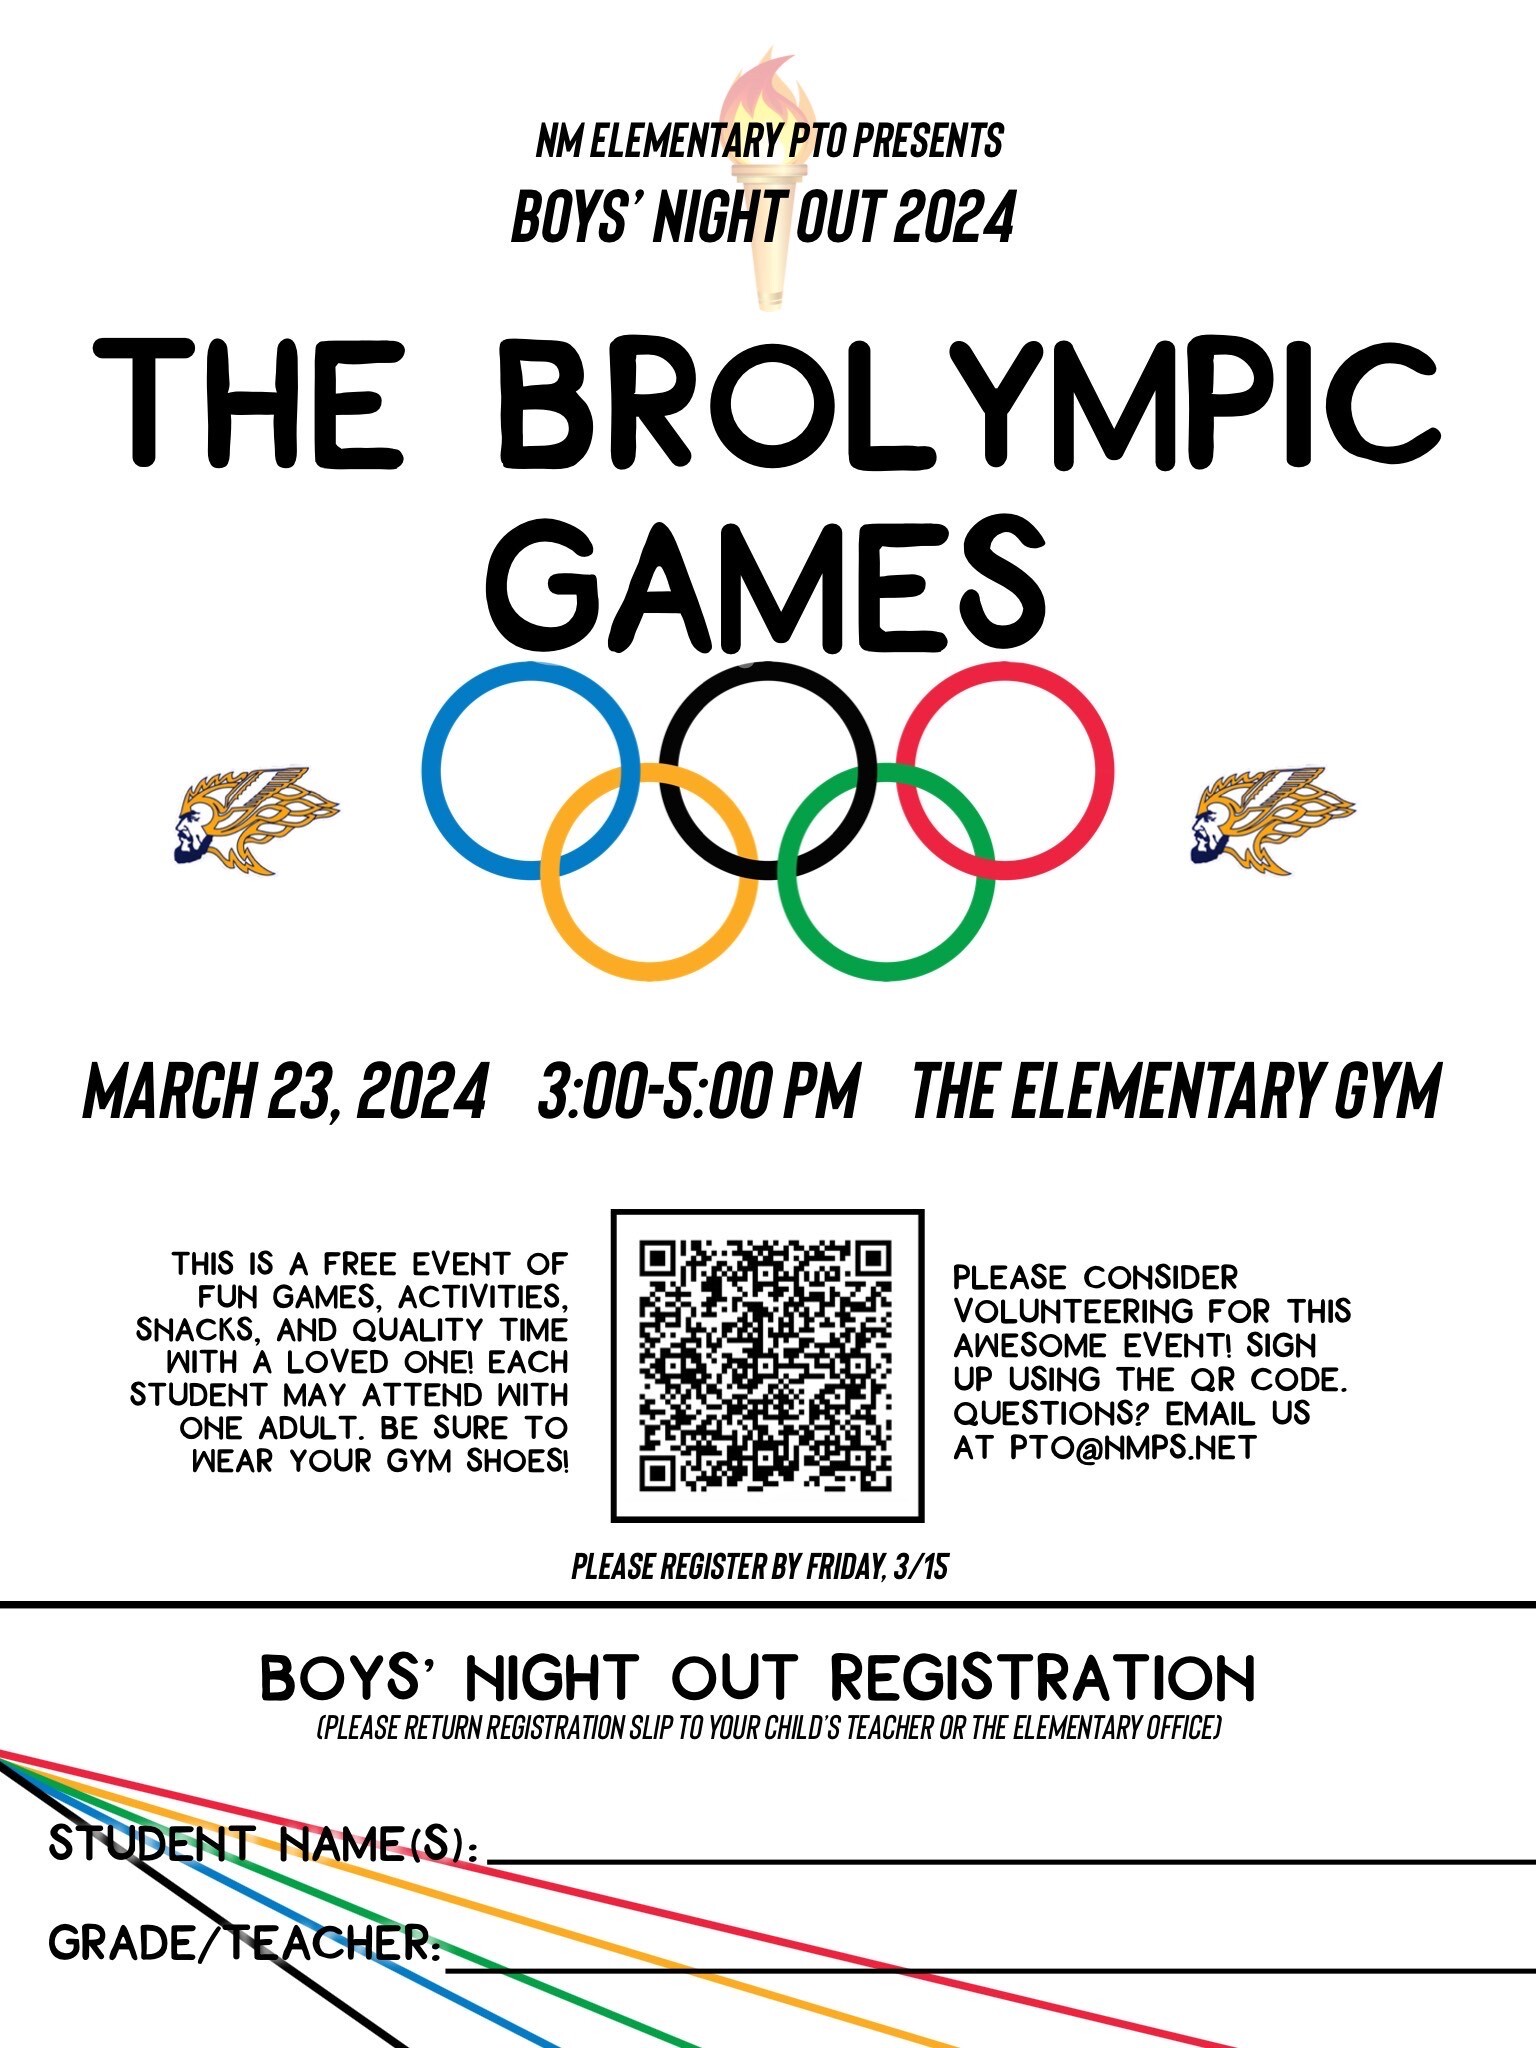 NM Elementary PTO Presents Boys' Night Out 2024 THE BROLYMPIC GAMES March 23, 2024 3-5 pm in the Elementary Gym  Registration due by Friday, 3/15